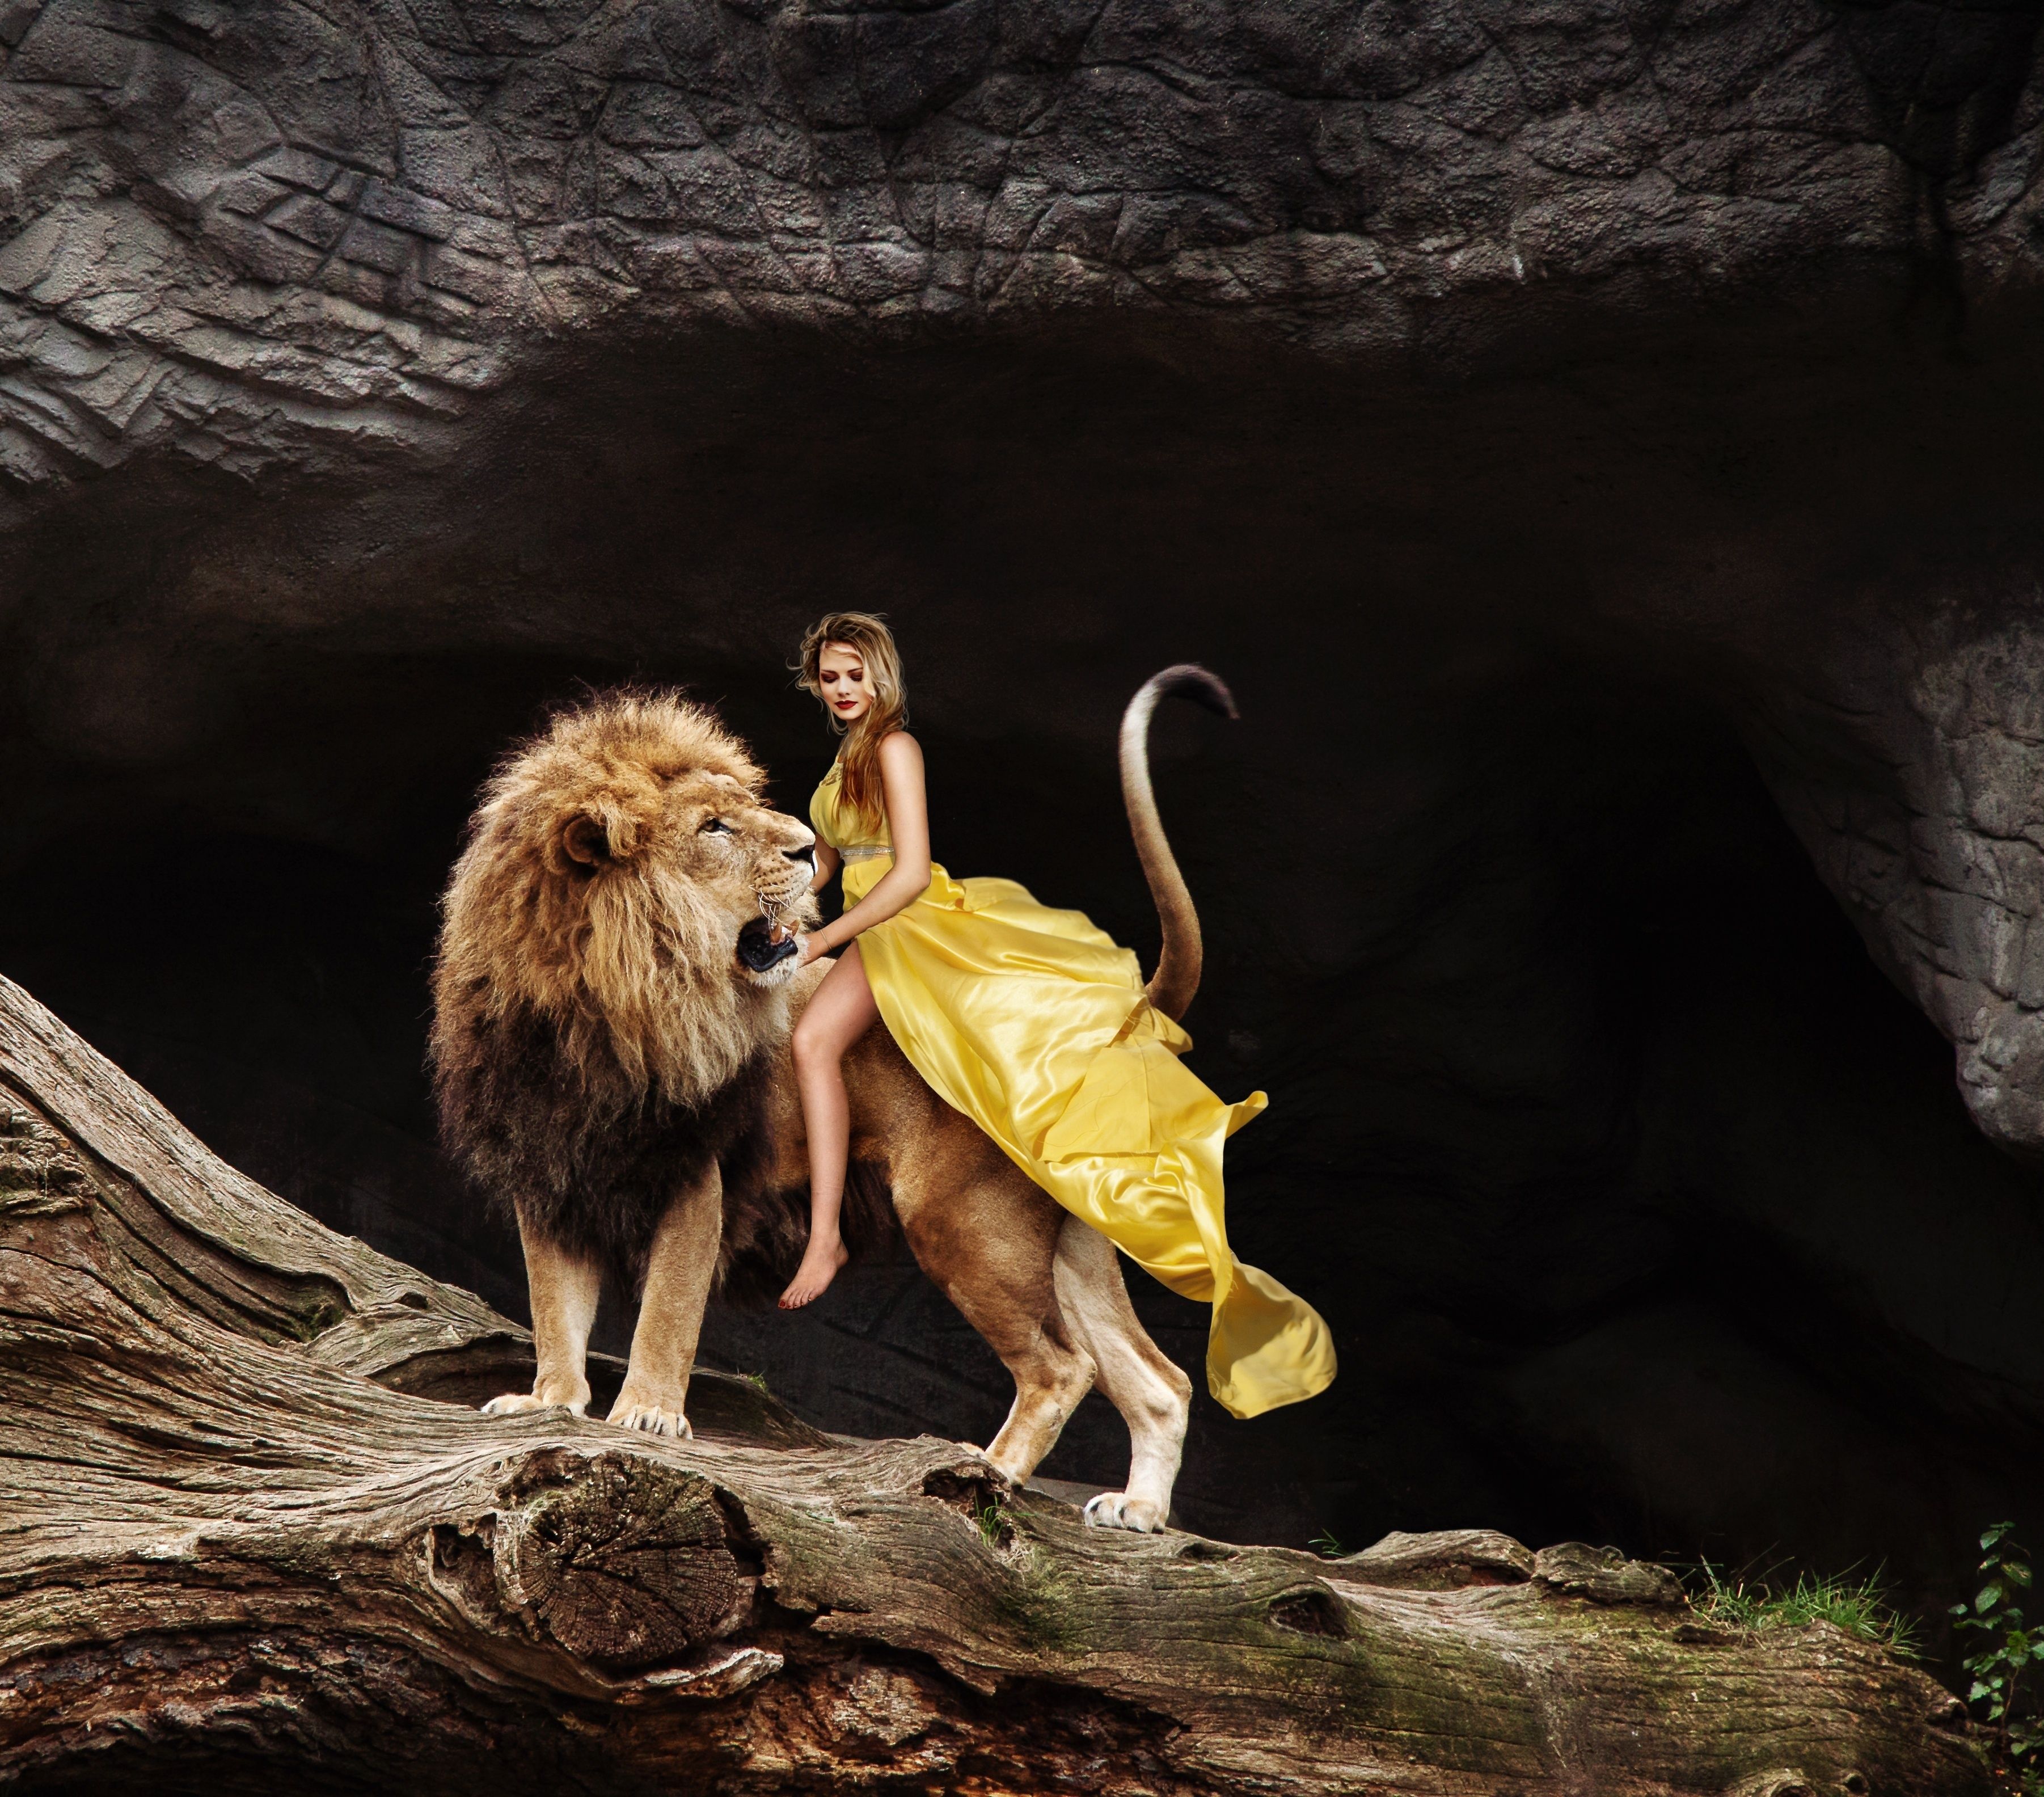 A woman in a yellow dress sits on a lion's back in a cave. - Lion